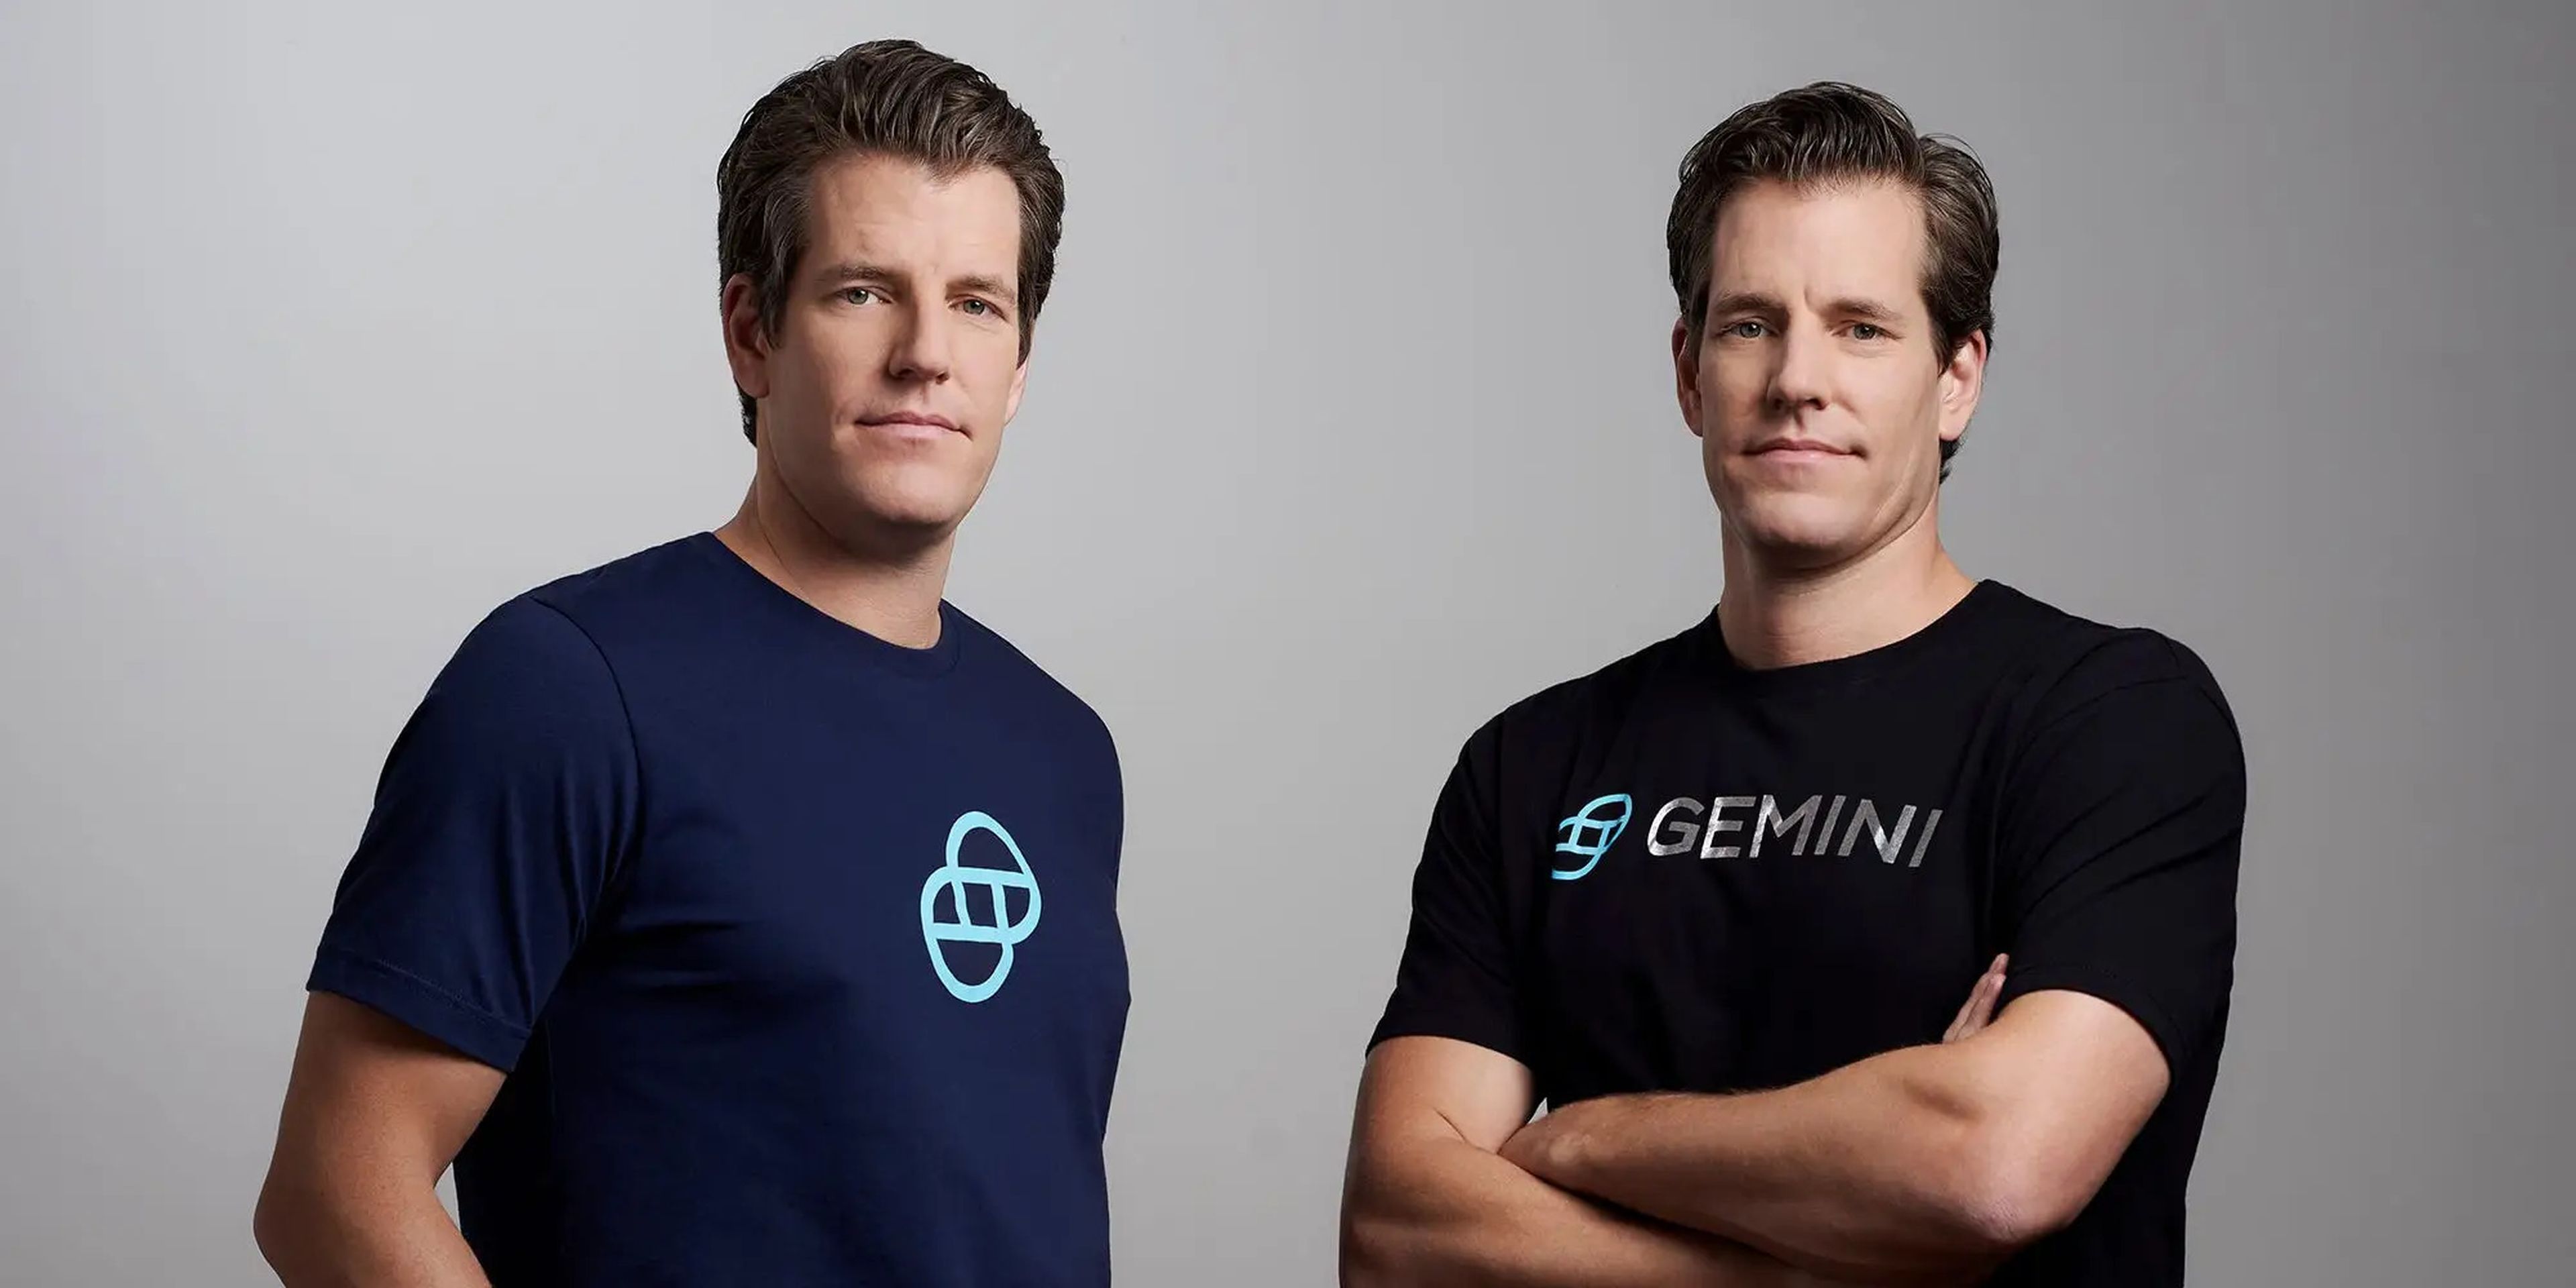 Gemini cofounders Tyler and Cameron Winklevoss pose for a photo against a gray background.